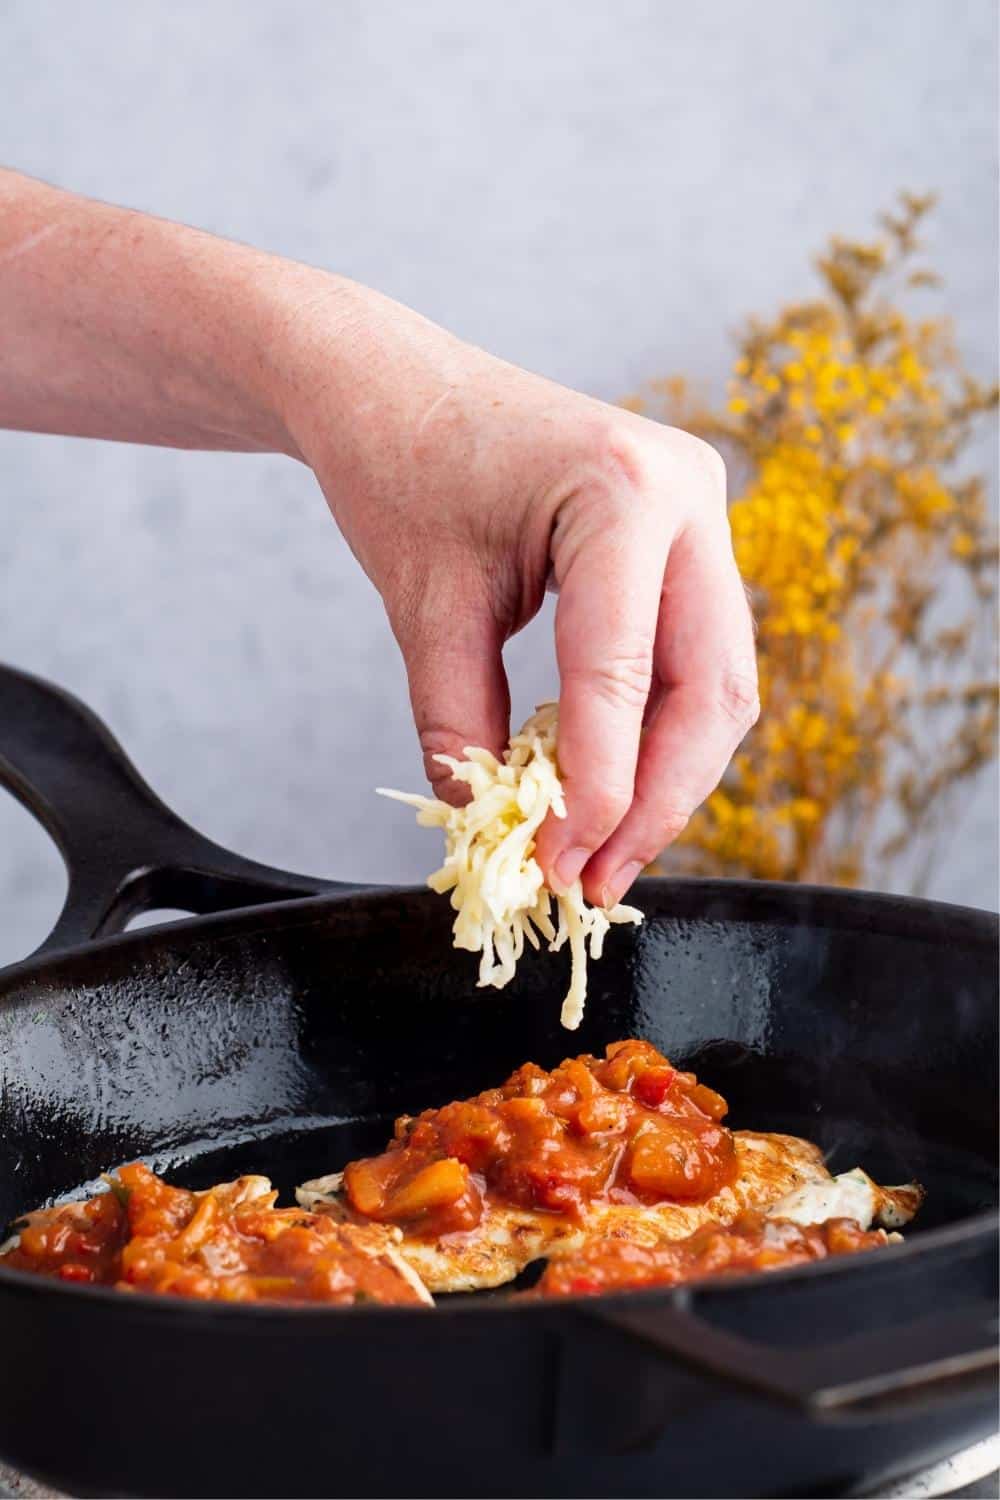 A hand holding shredded cheese over three pieces of chicken with sauce on top in a black skillet.